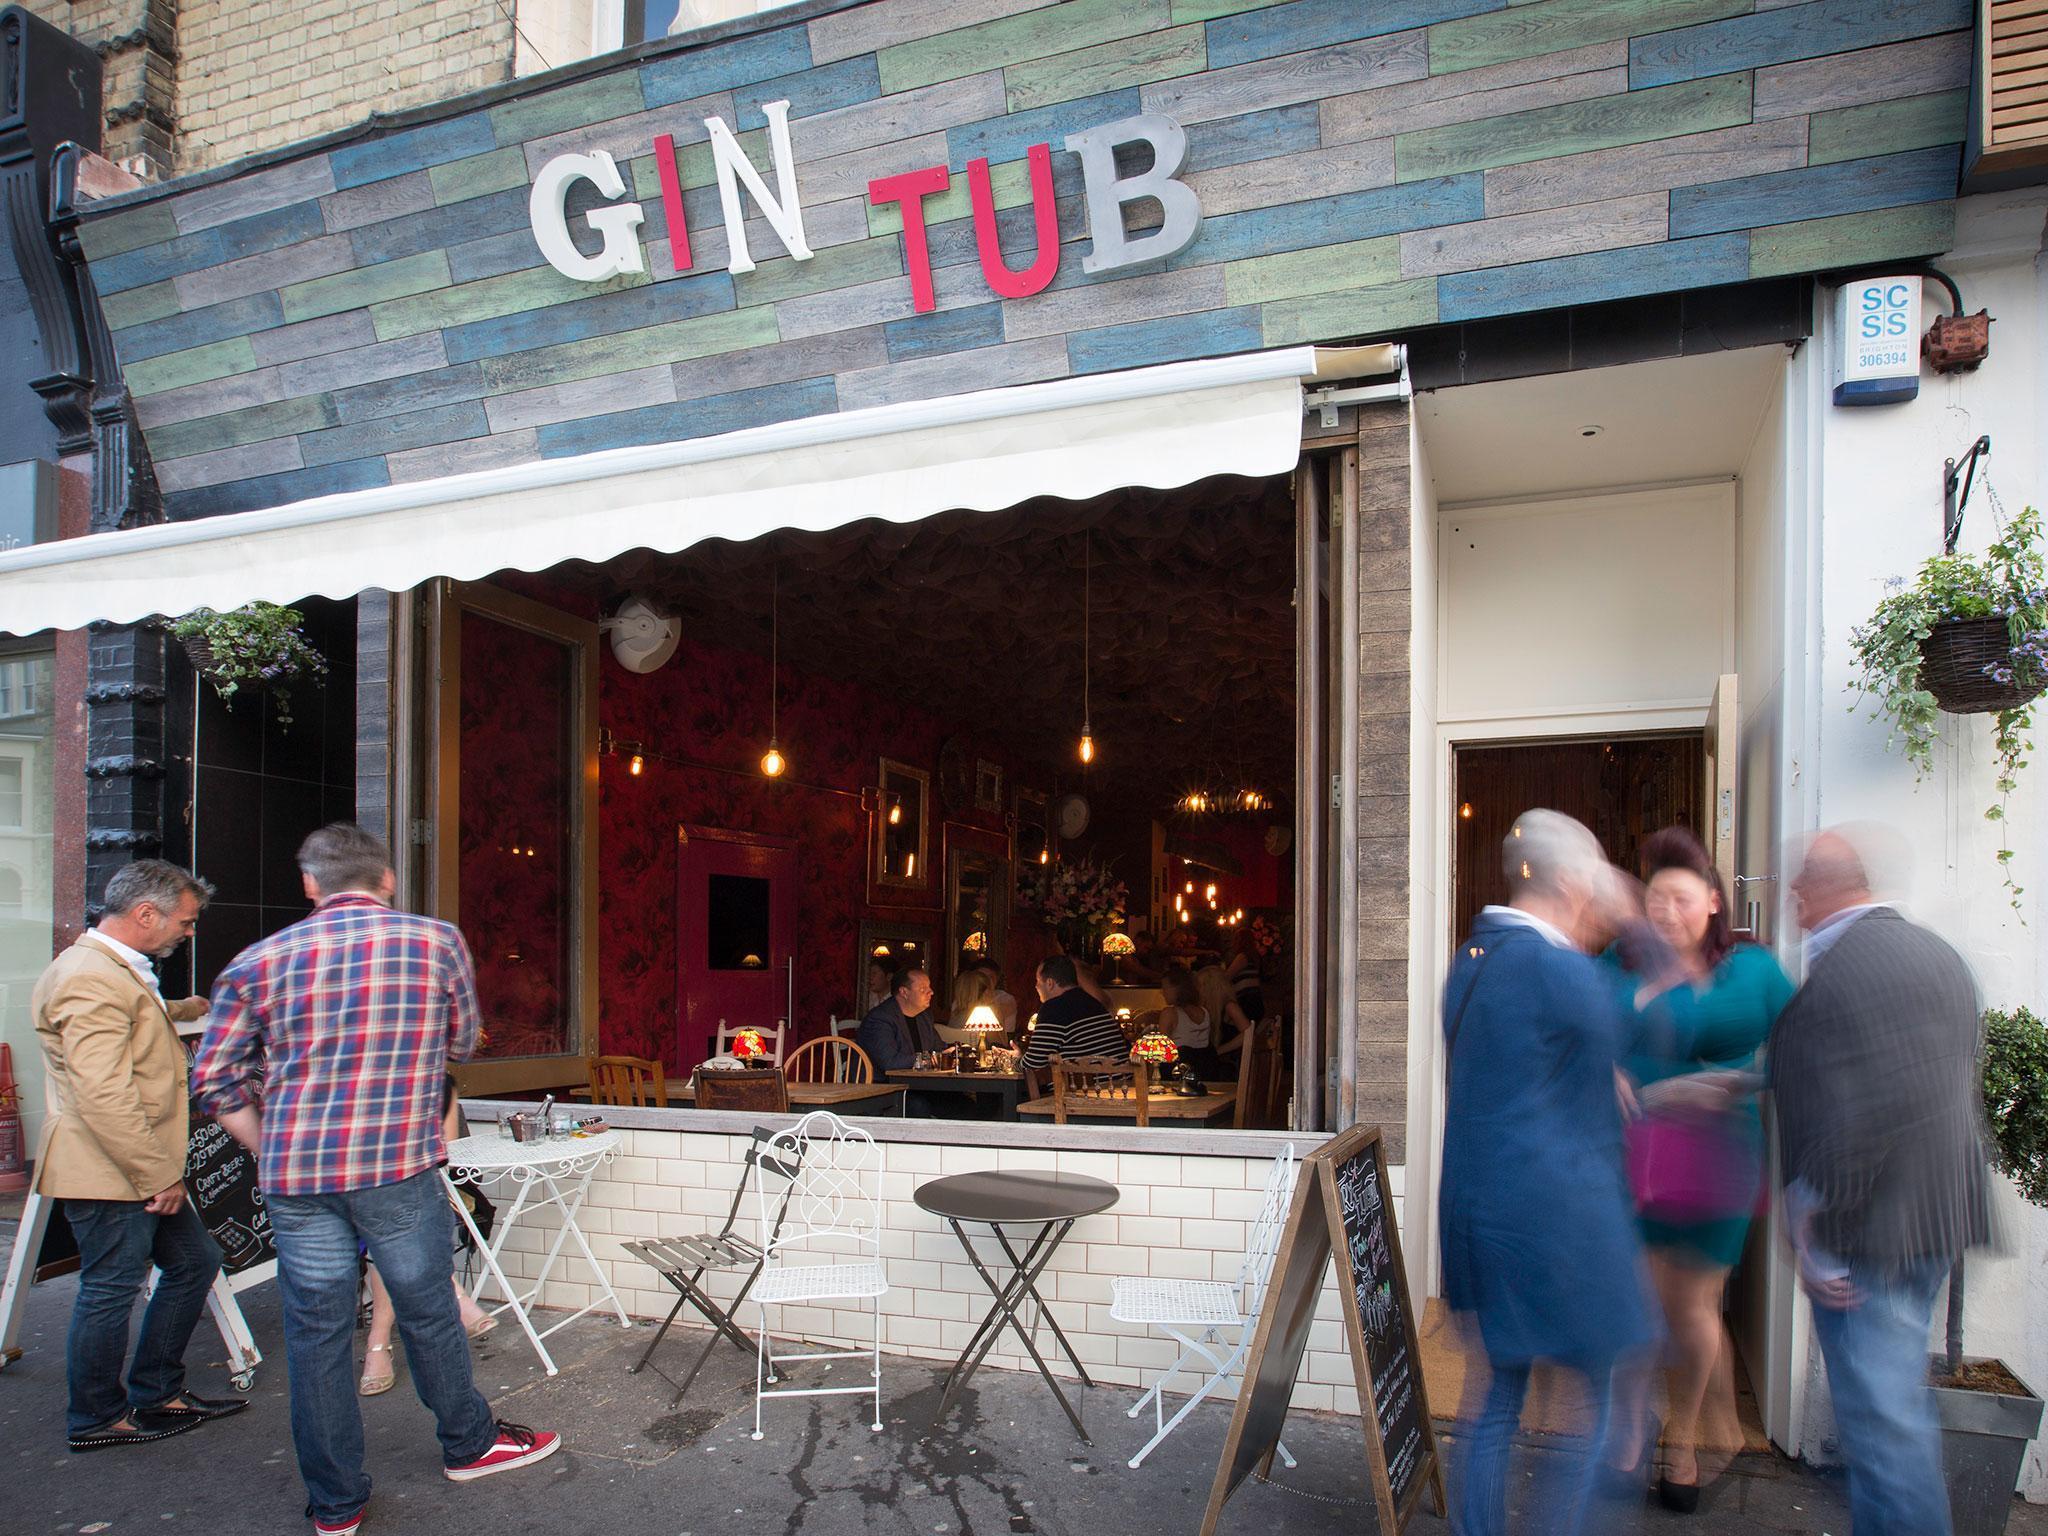 The Gin Tub has foil in its walls and copper on the ceiling to create a Faraday cage effect